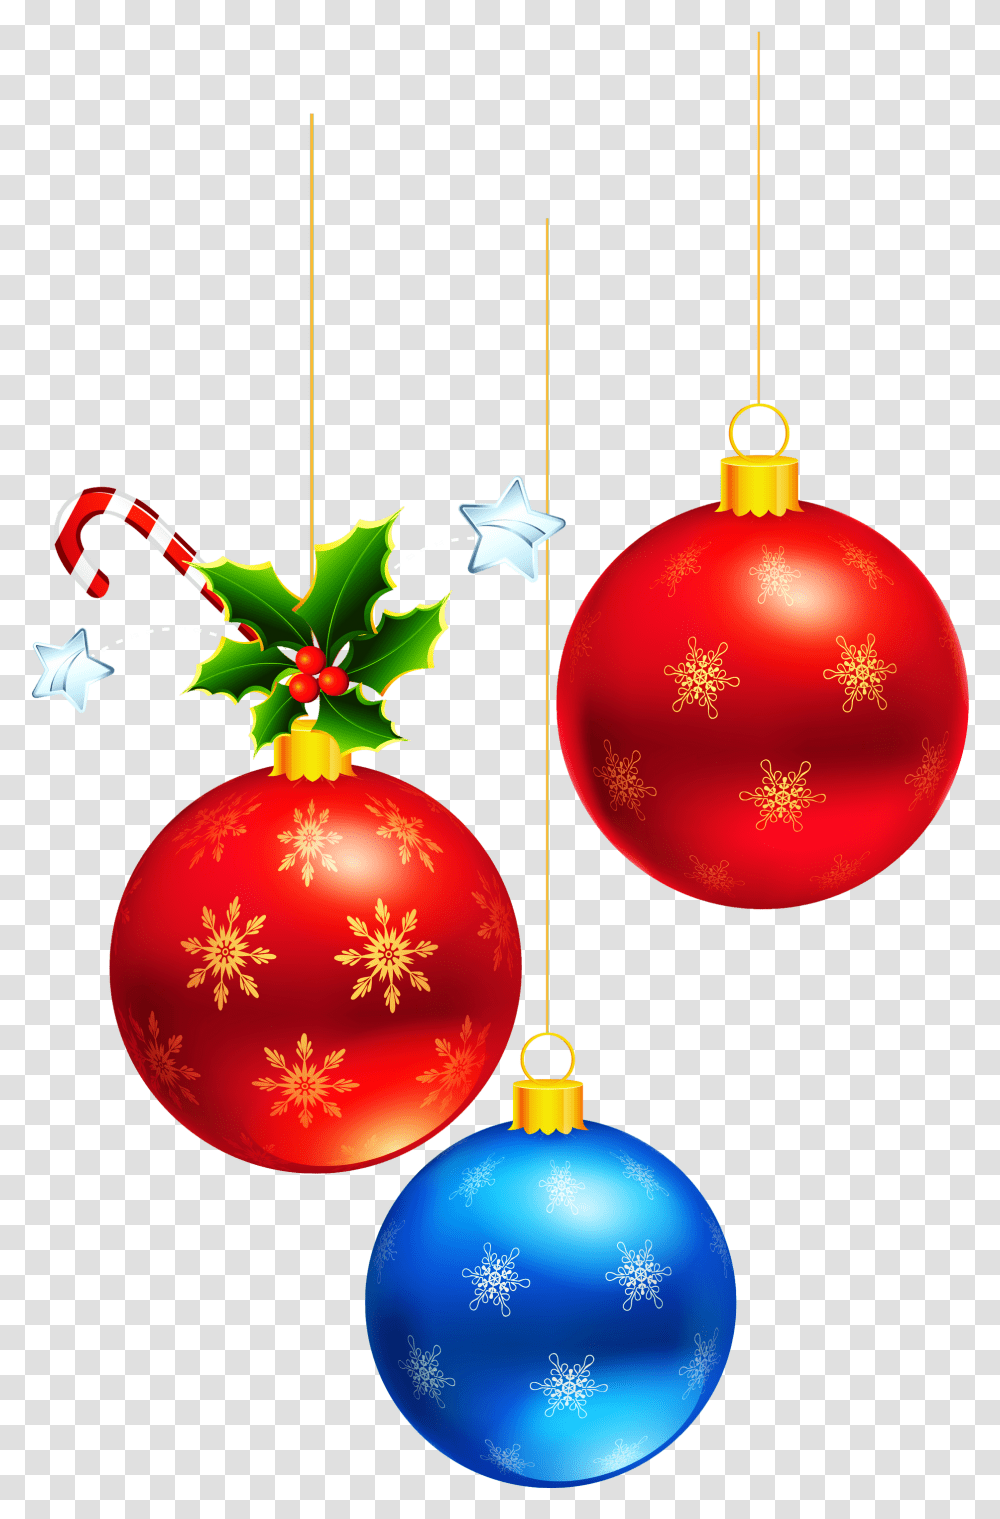 Deco Ornament Tree Decoration Ornaments Christmas Ornament Clipart Background, Plant, Pattern, Lamp, Christmas Tree Transparent Png